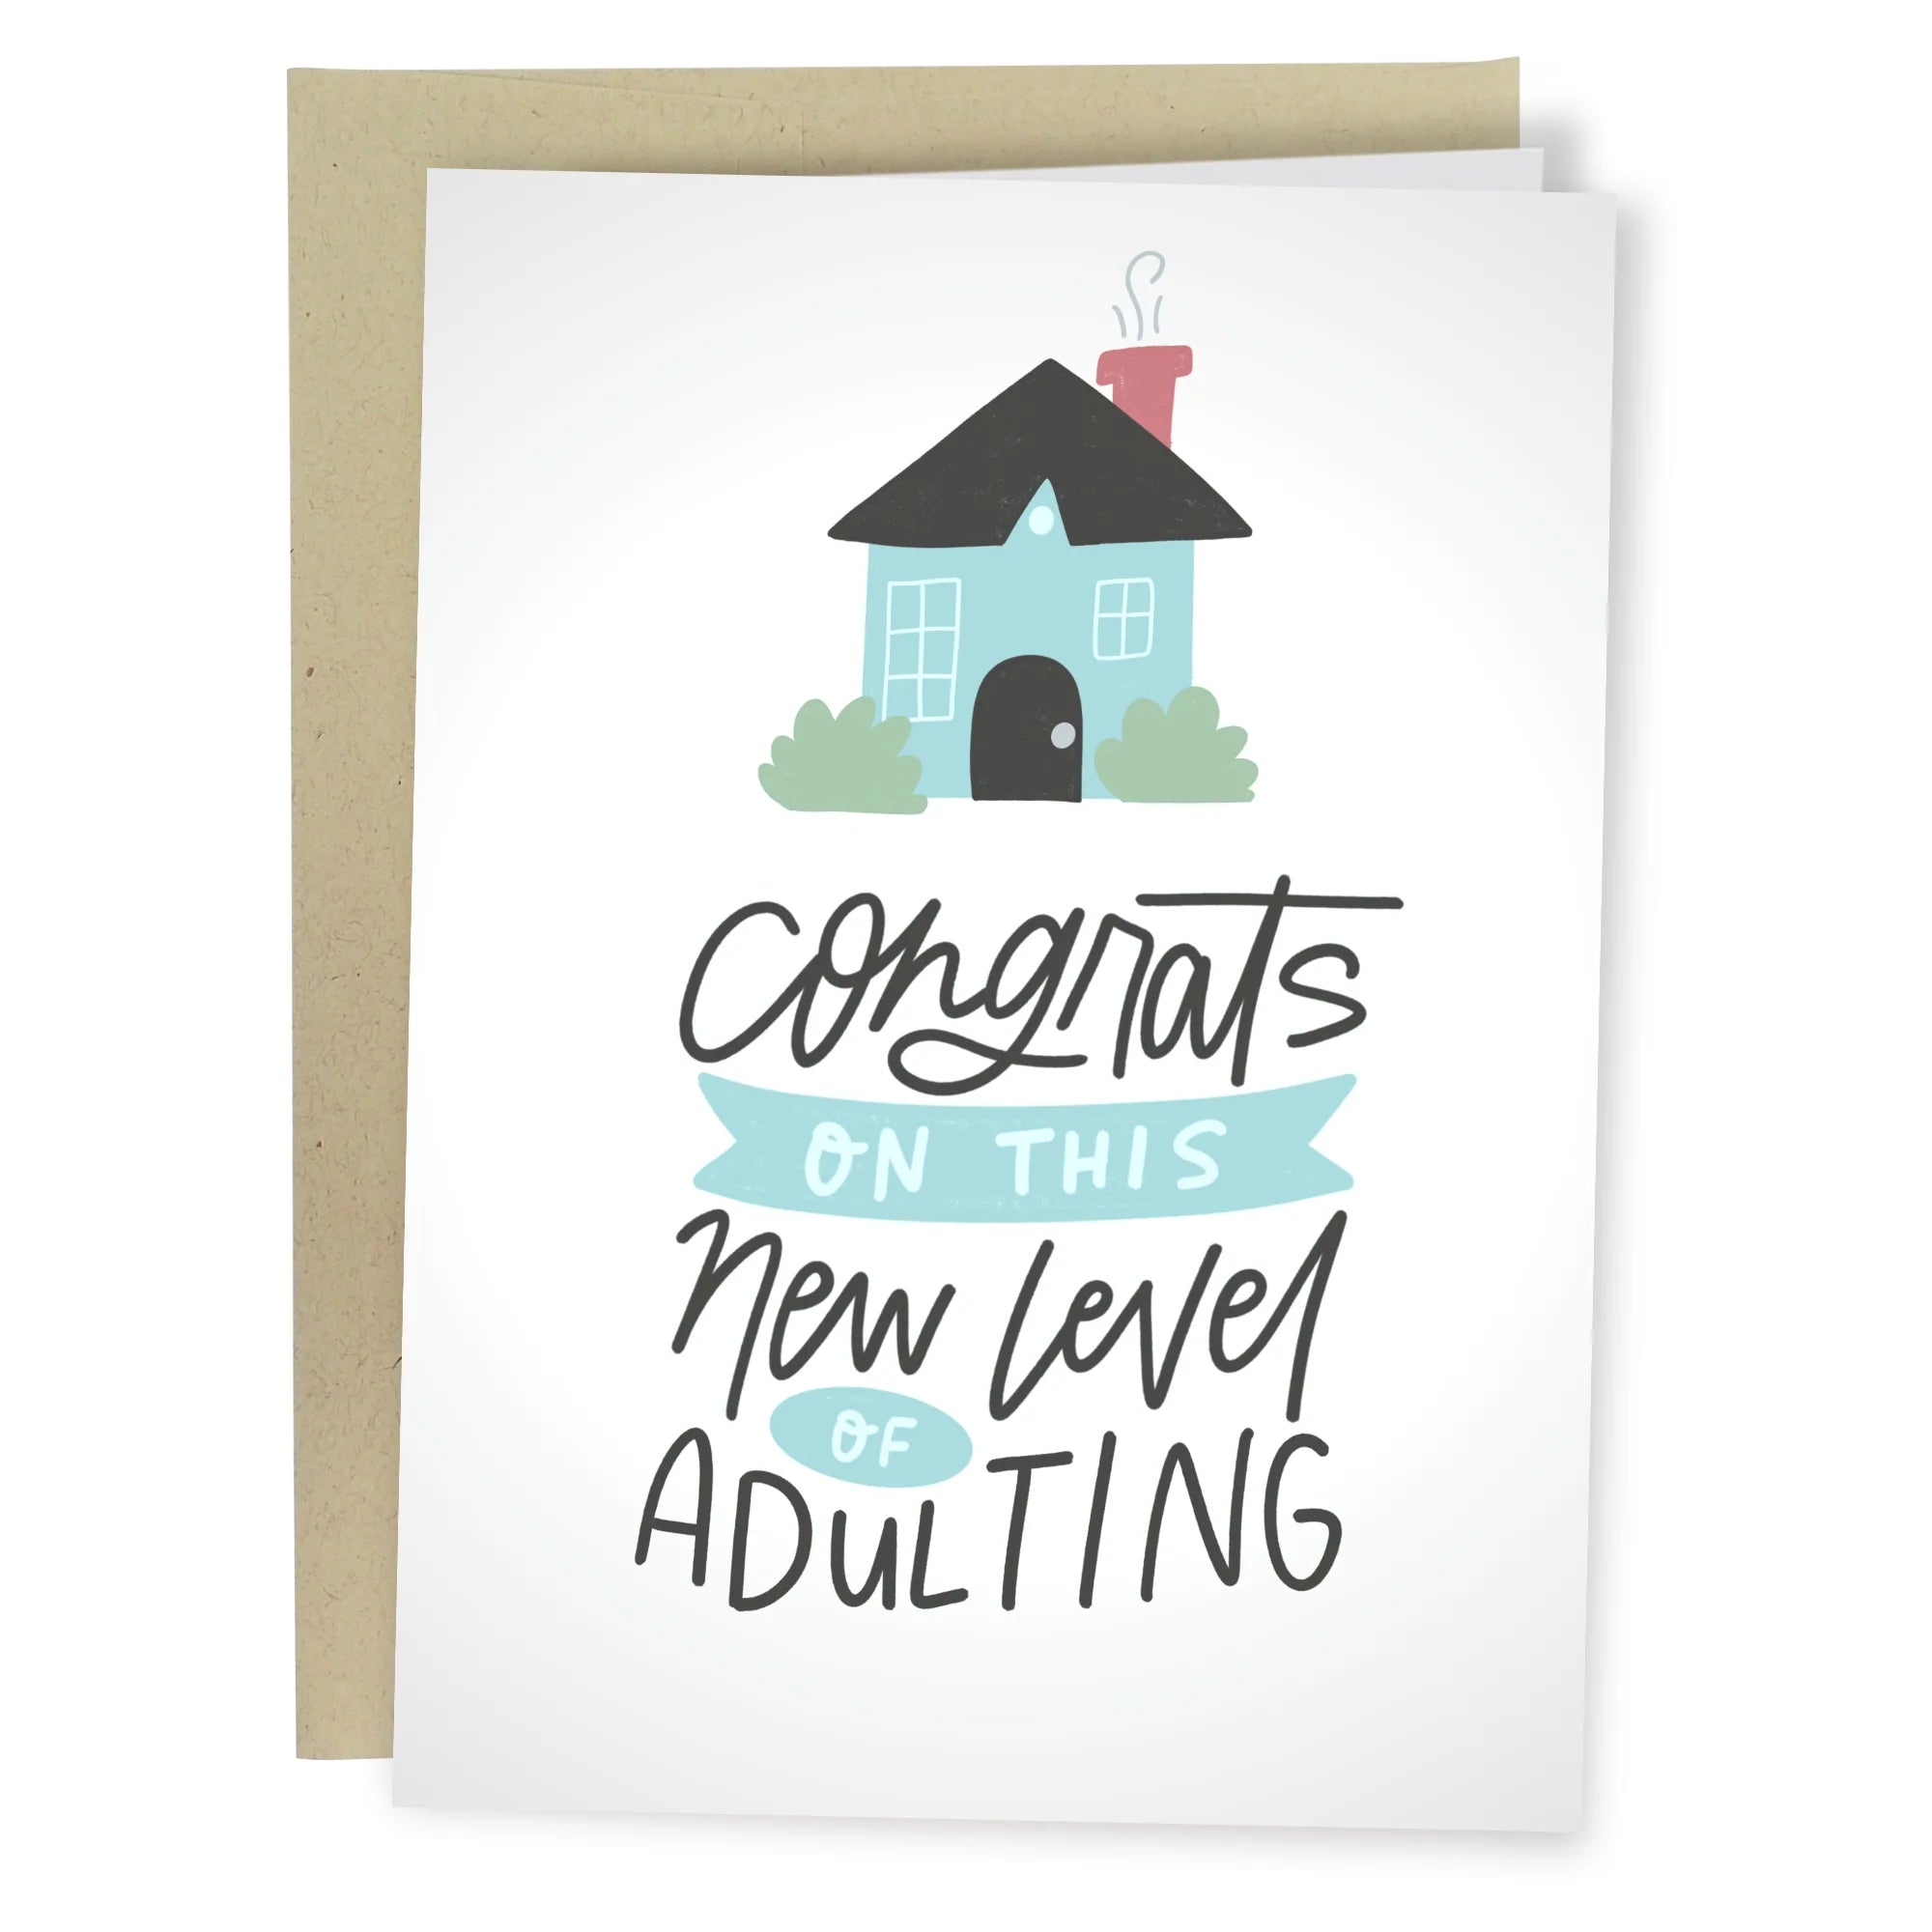 New Level of Adulting - Greeting Card